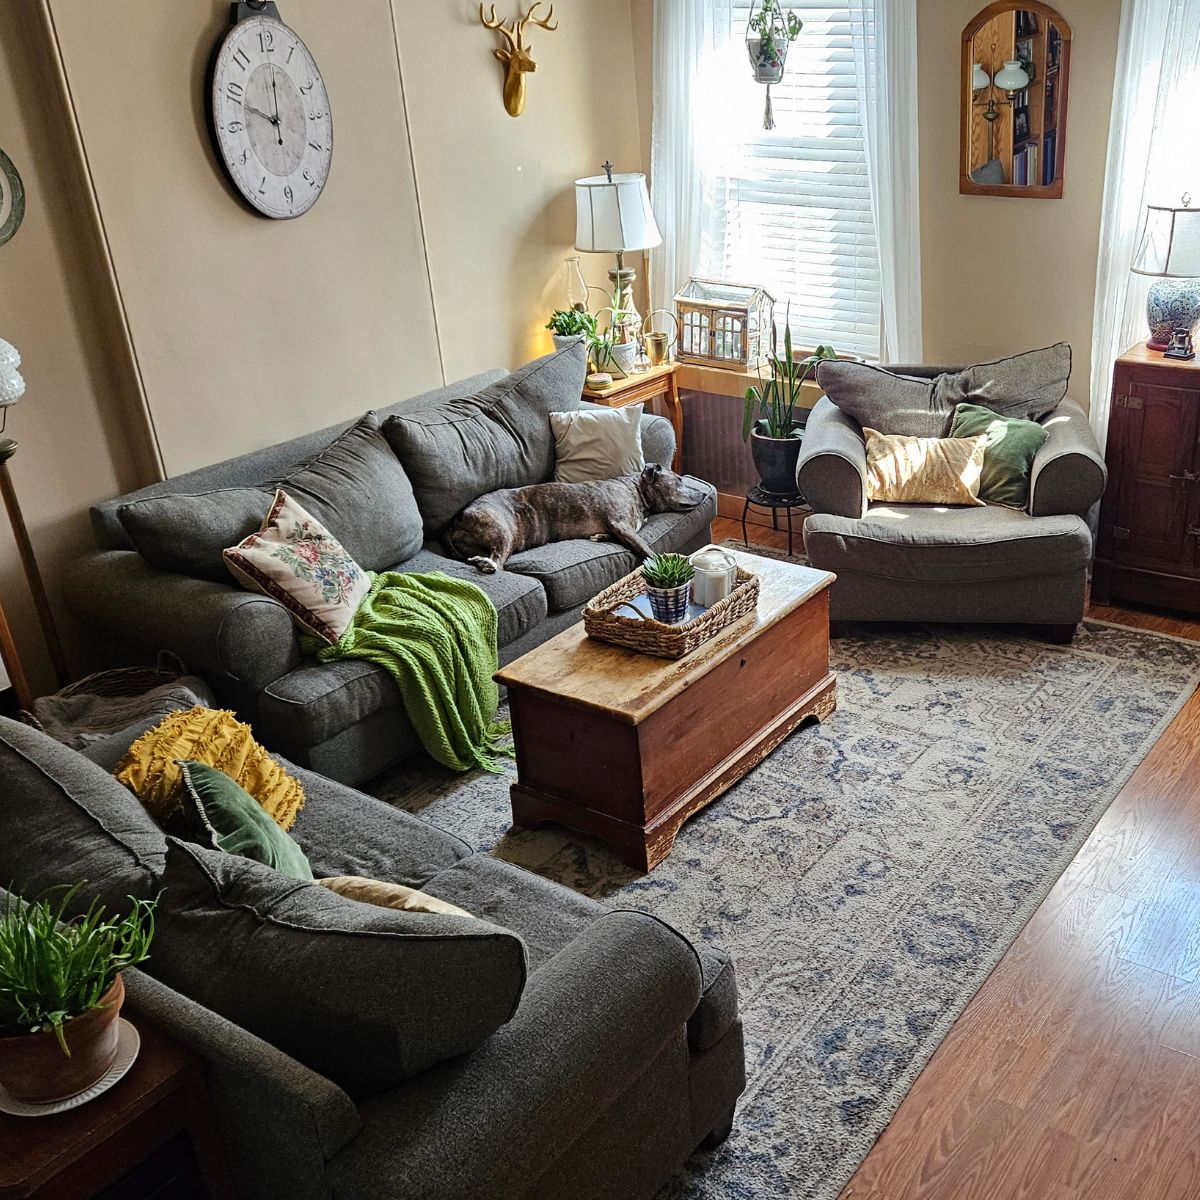 A living room filled with antiques & vintage decor with a cozy & inviting atmosphere.